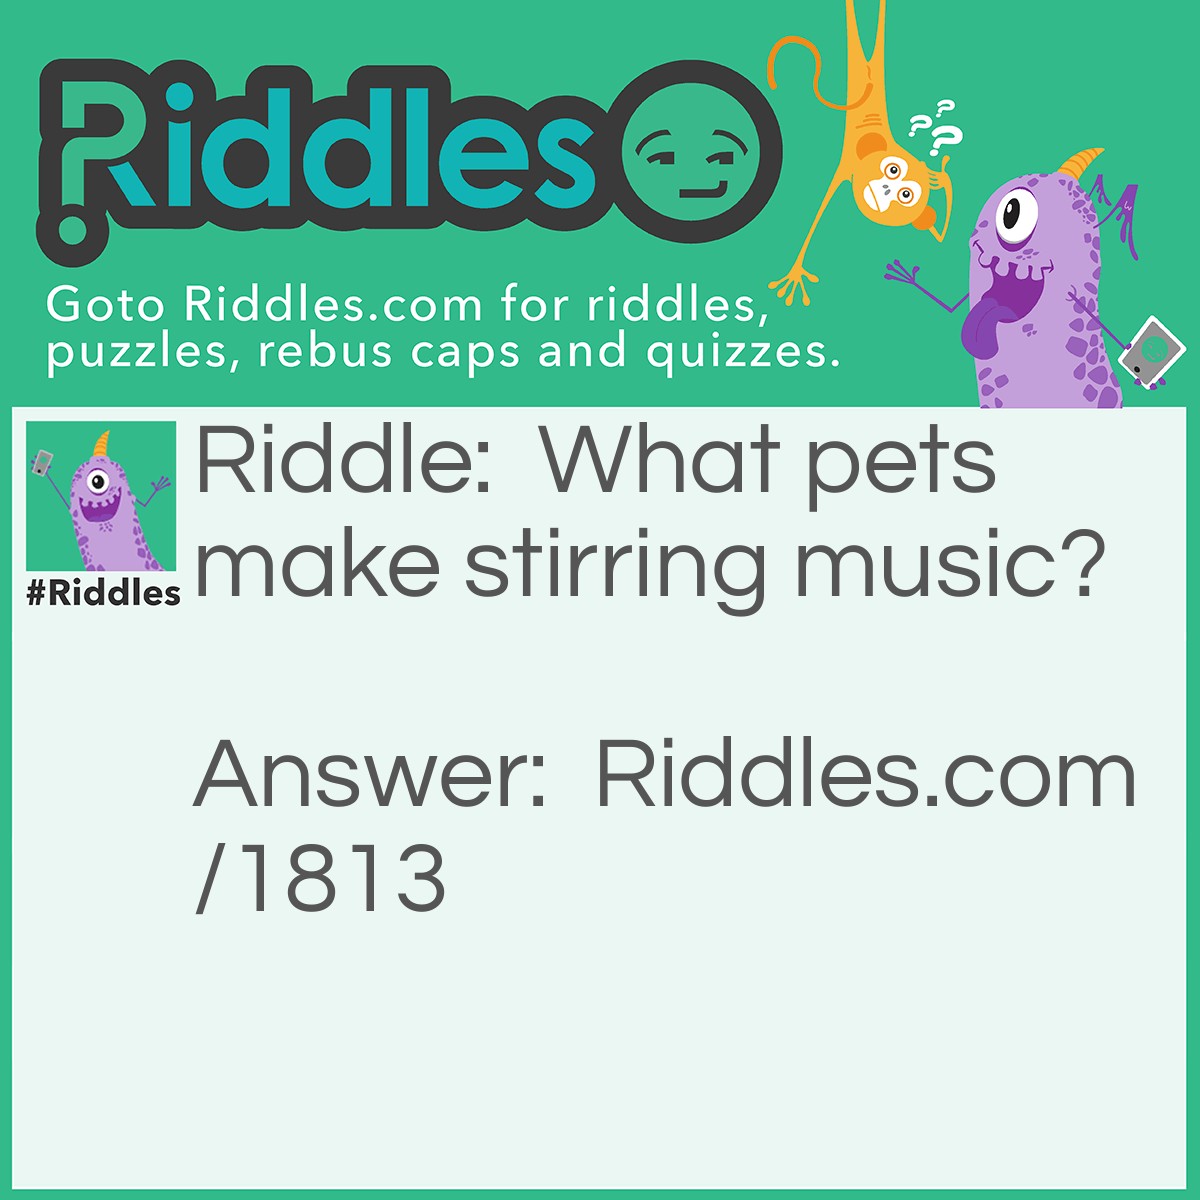 Riddle: What pets make stirring music? Answer: Trumpets.